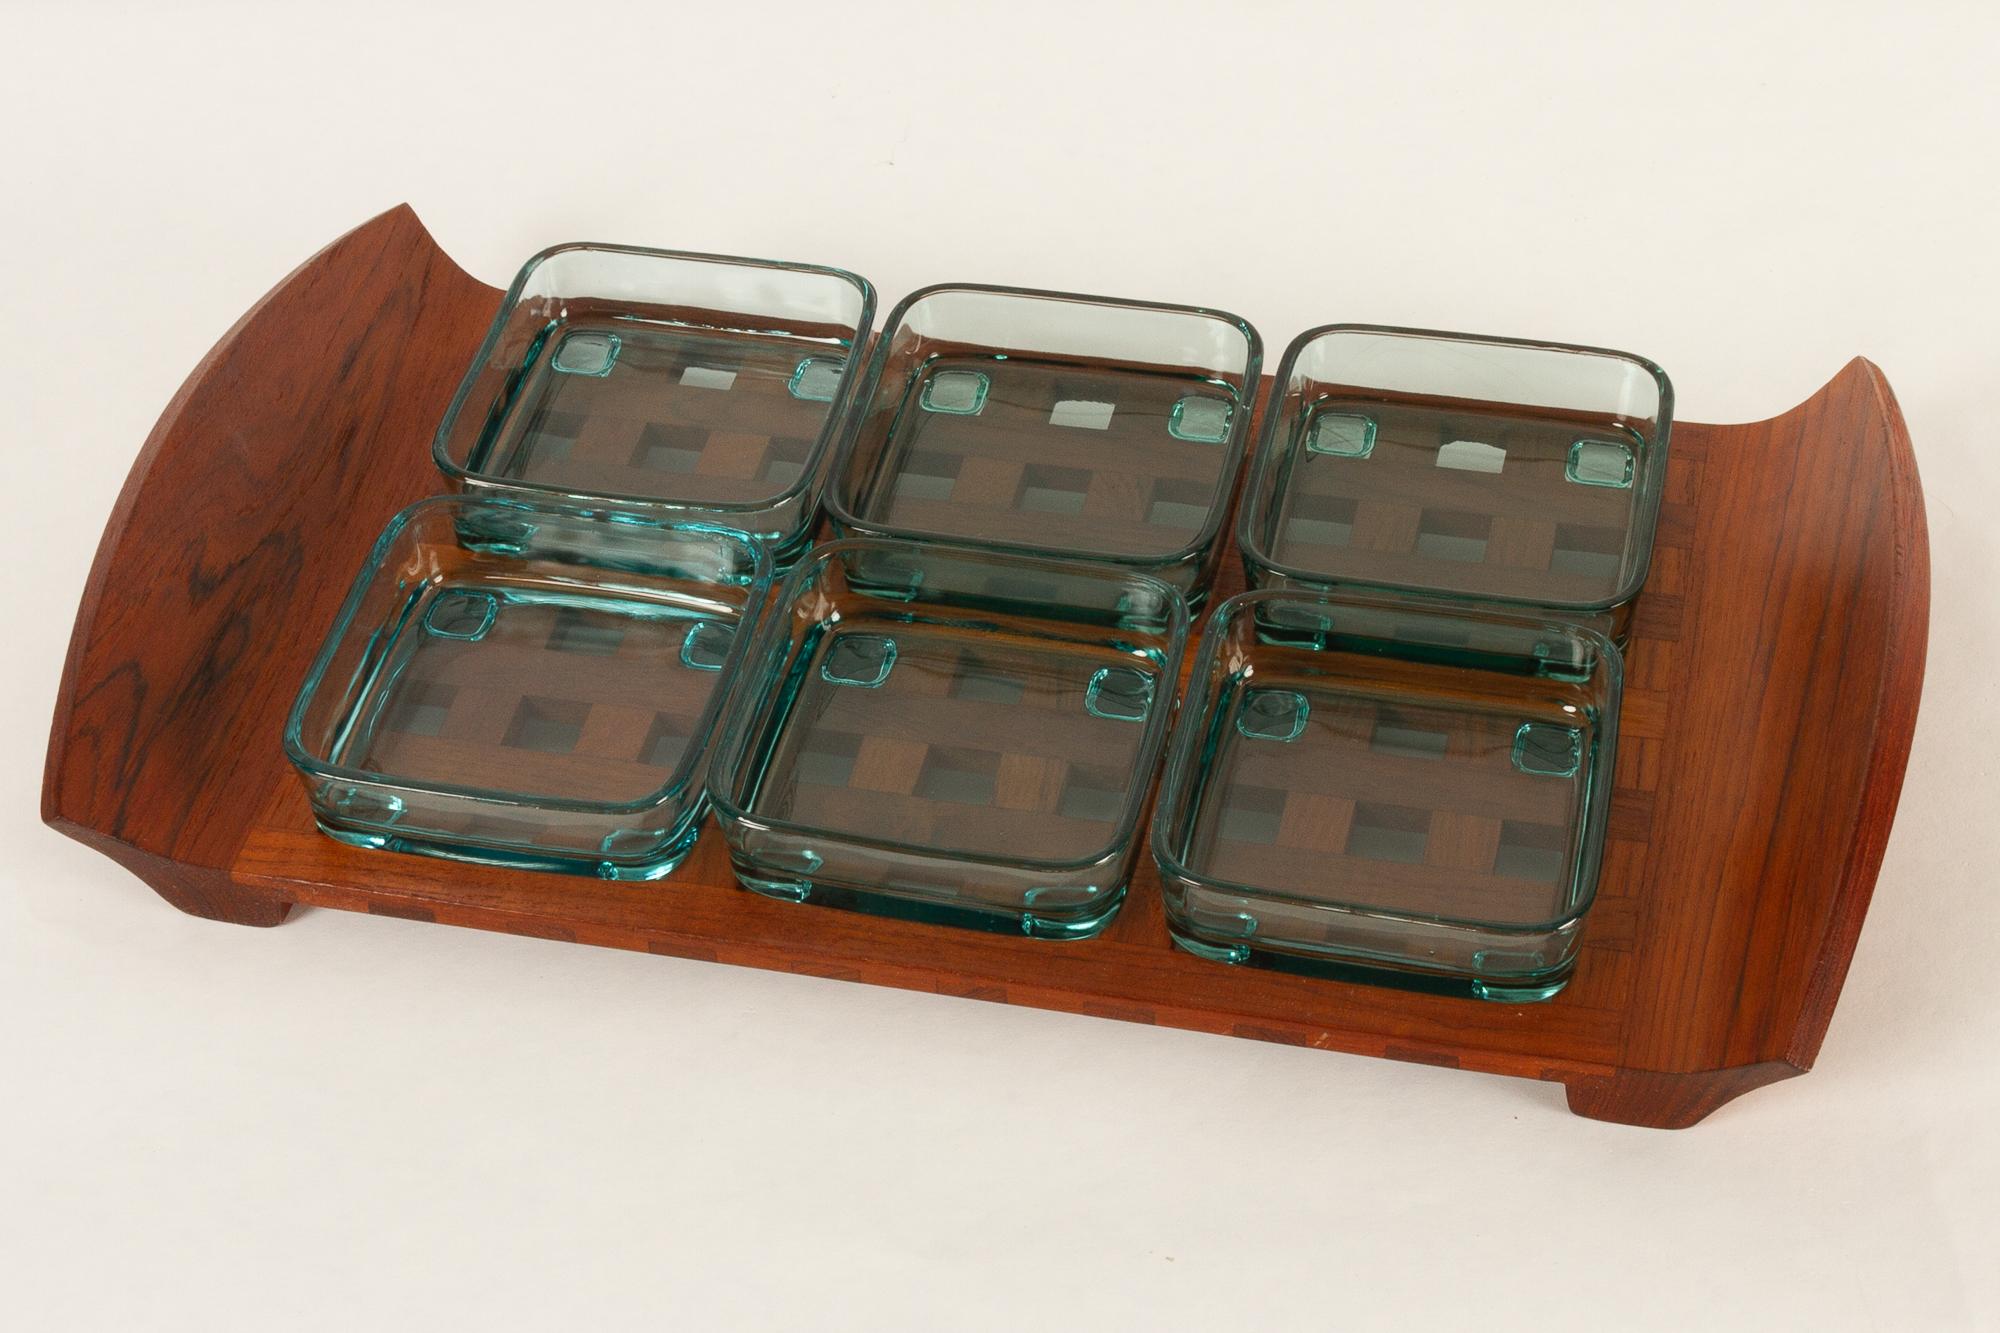 Vintage Danish Teak Tray with Glass Bowls by Jens Harald Quistgaard, 1960s In Good Condition For Sale In Asaa, DK